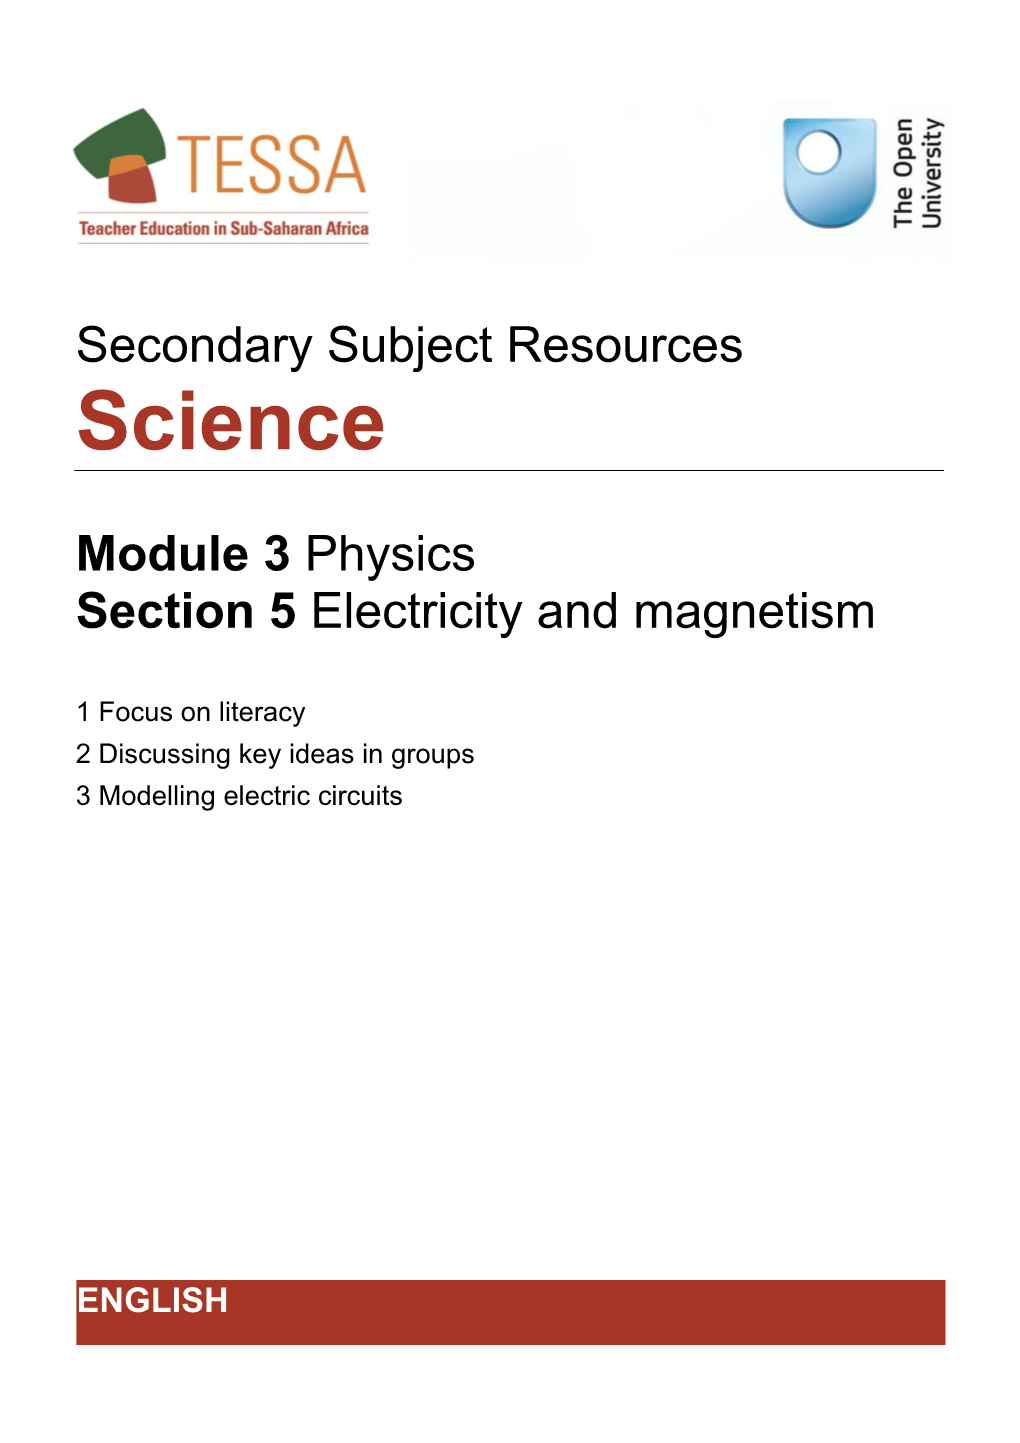 Section 5 : Electricity and Magnetism